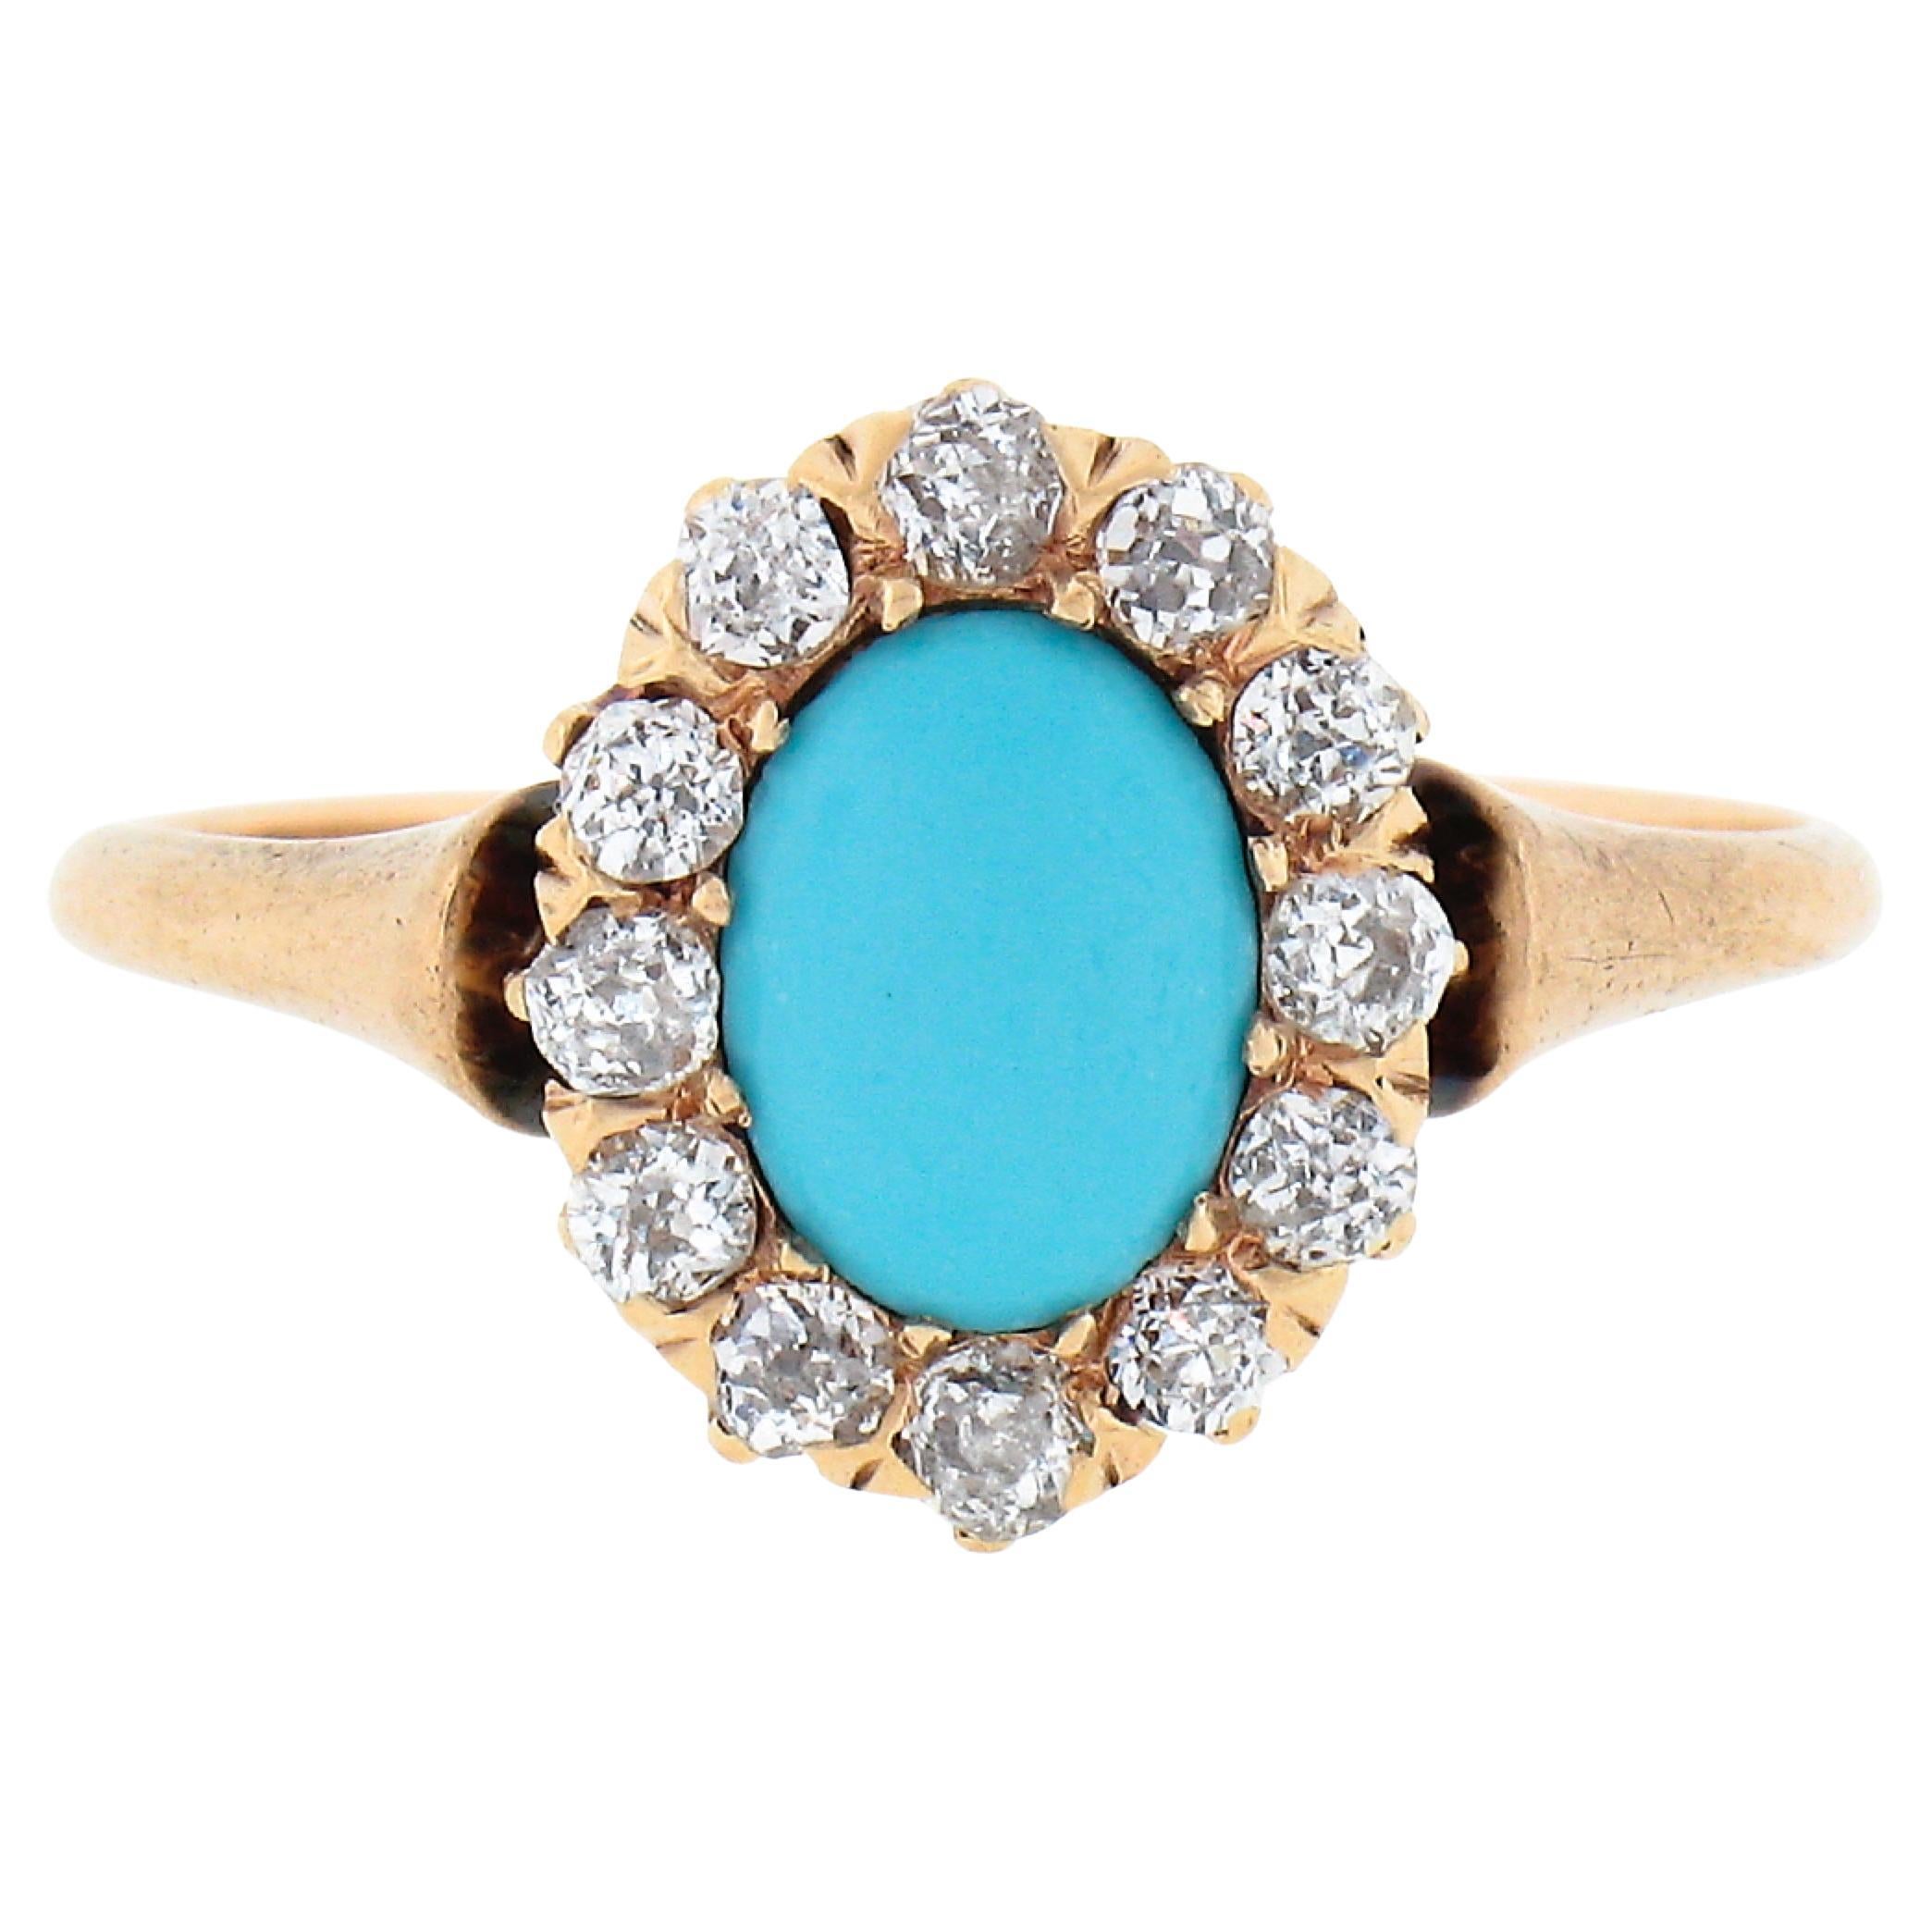 Antique Victorian 14k Gold Oval Cabochon Turquoise w/ Mine Cut Diamond Halo Ring